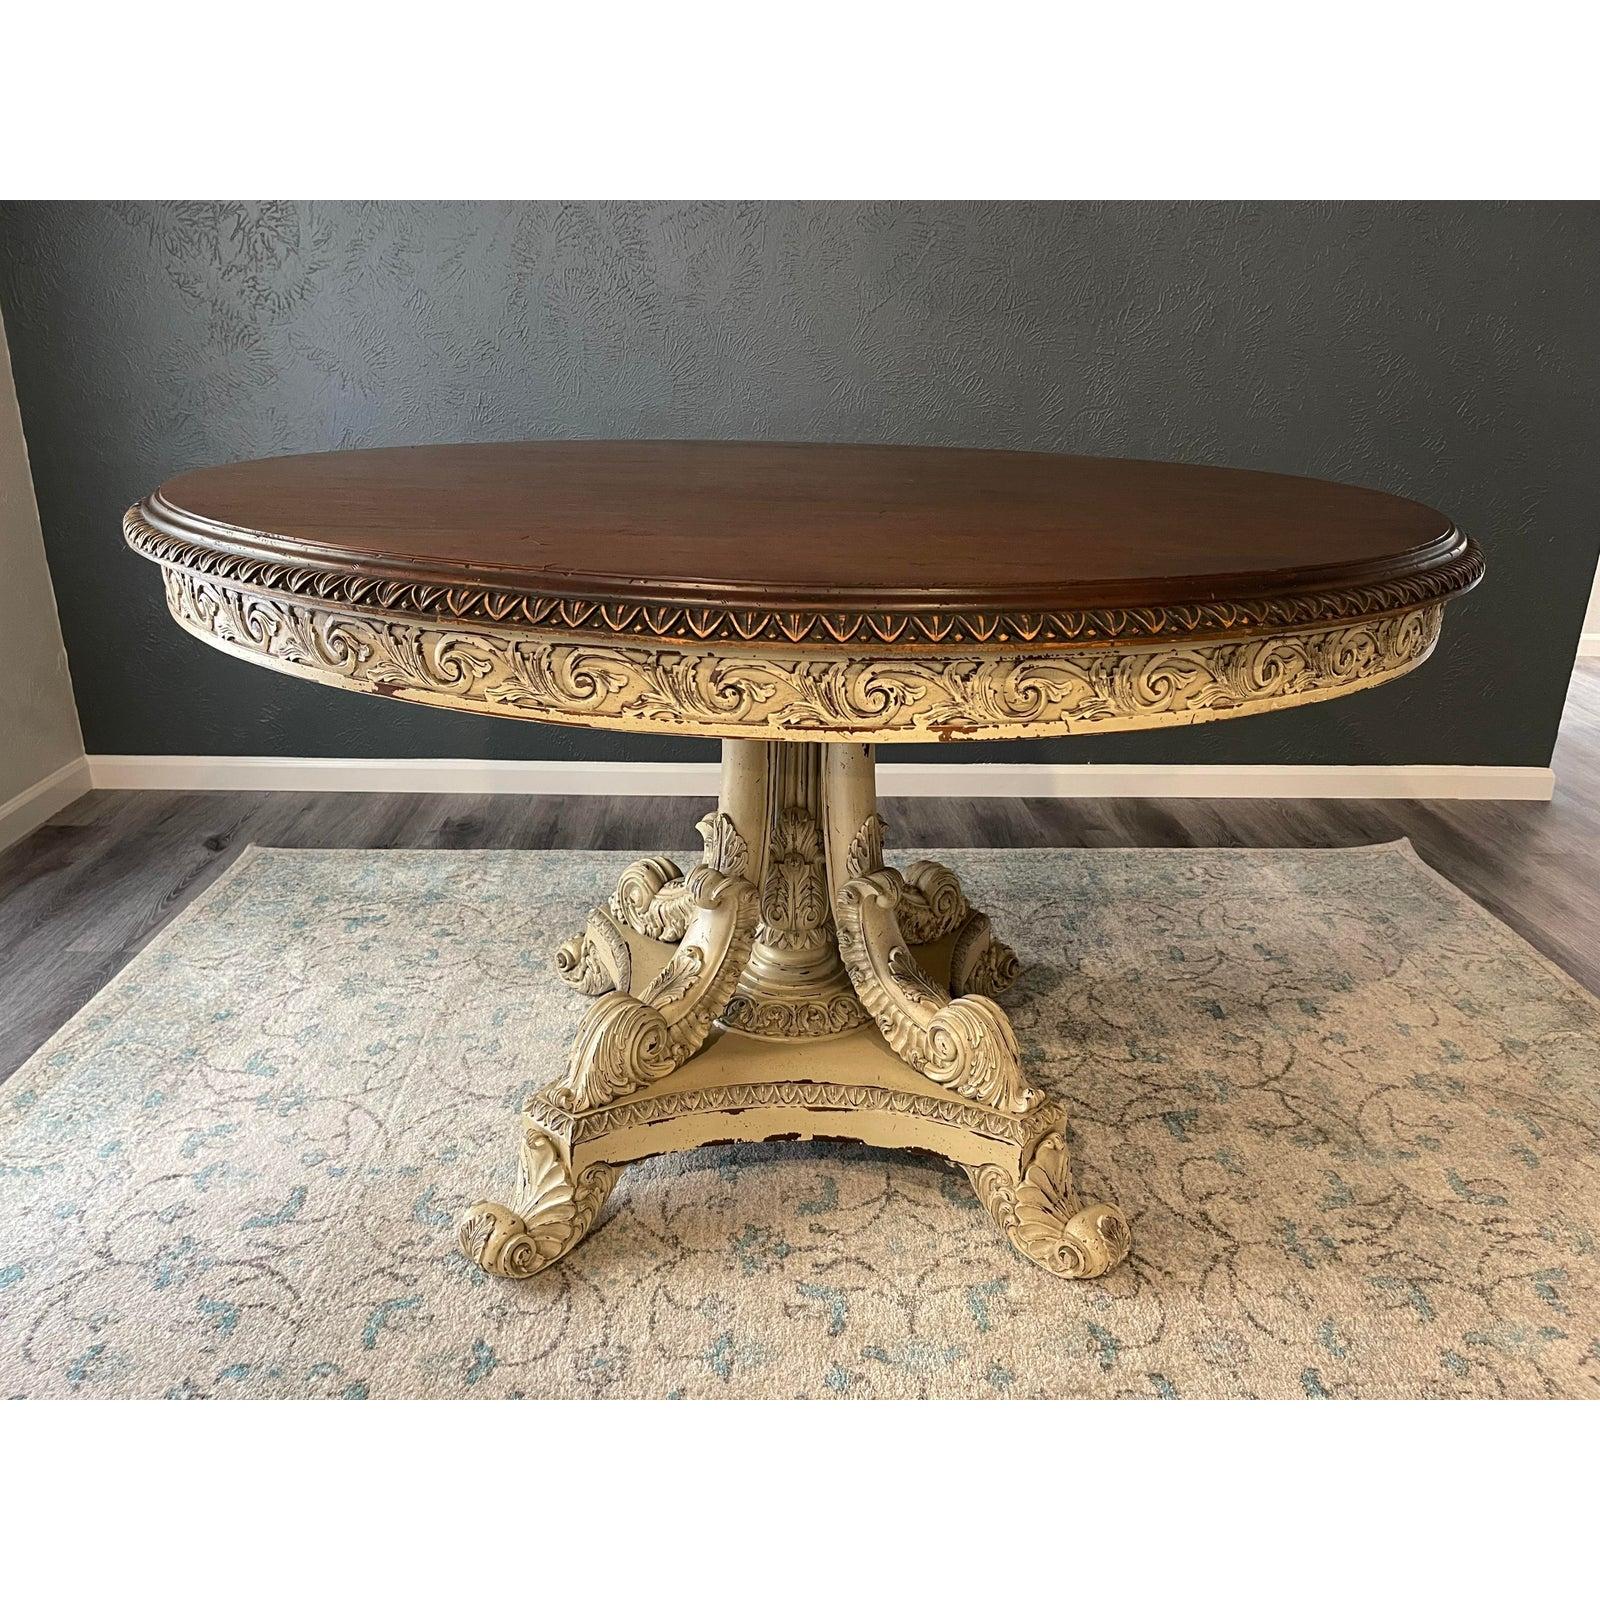 A magnificent custom made hand carved distressed painted cream rustic modern farm house chic round high-top dining table (bar counter height / pub height) by American maker Paradigm Furniture Design.

The rare, one-of-a-kind masterpiece handmade in